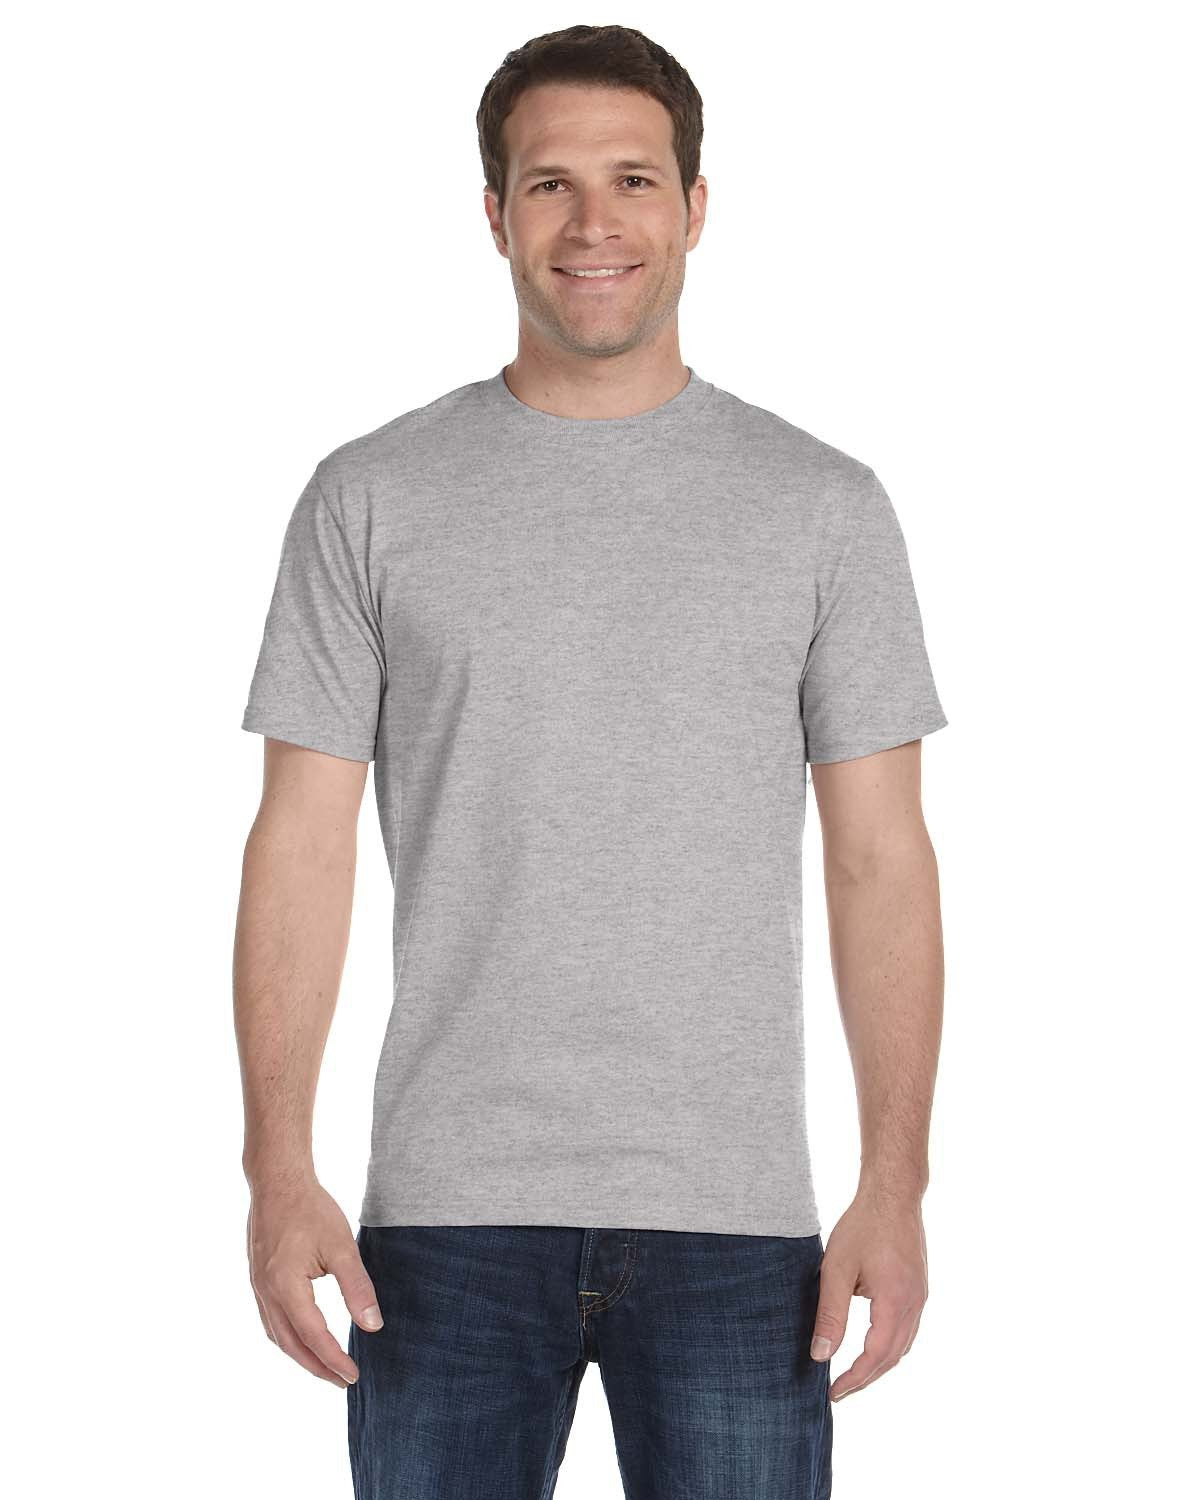 INTRODUCING-HANES-MENS-TALL-BEEFY-TÂ®-UNMATCHED-COMFORT-AND-QUALITY-FOR-TALLER-INDIVIDUALS